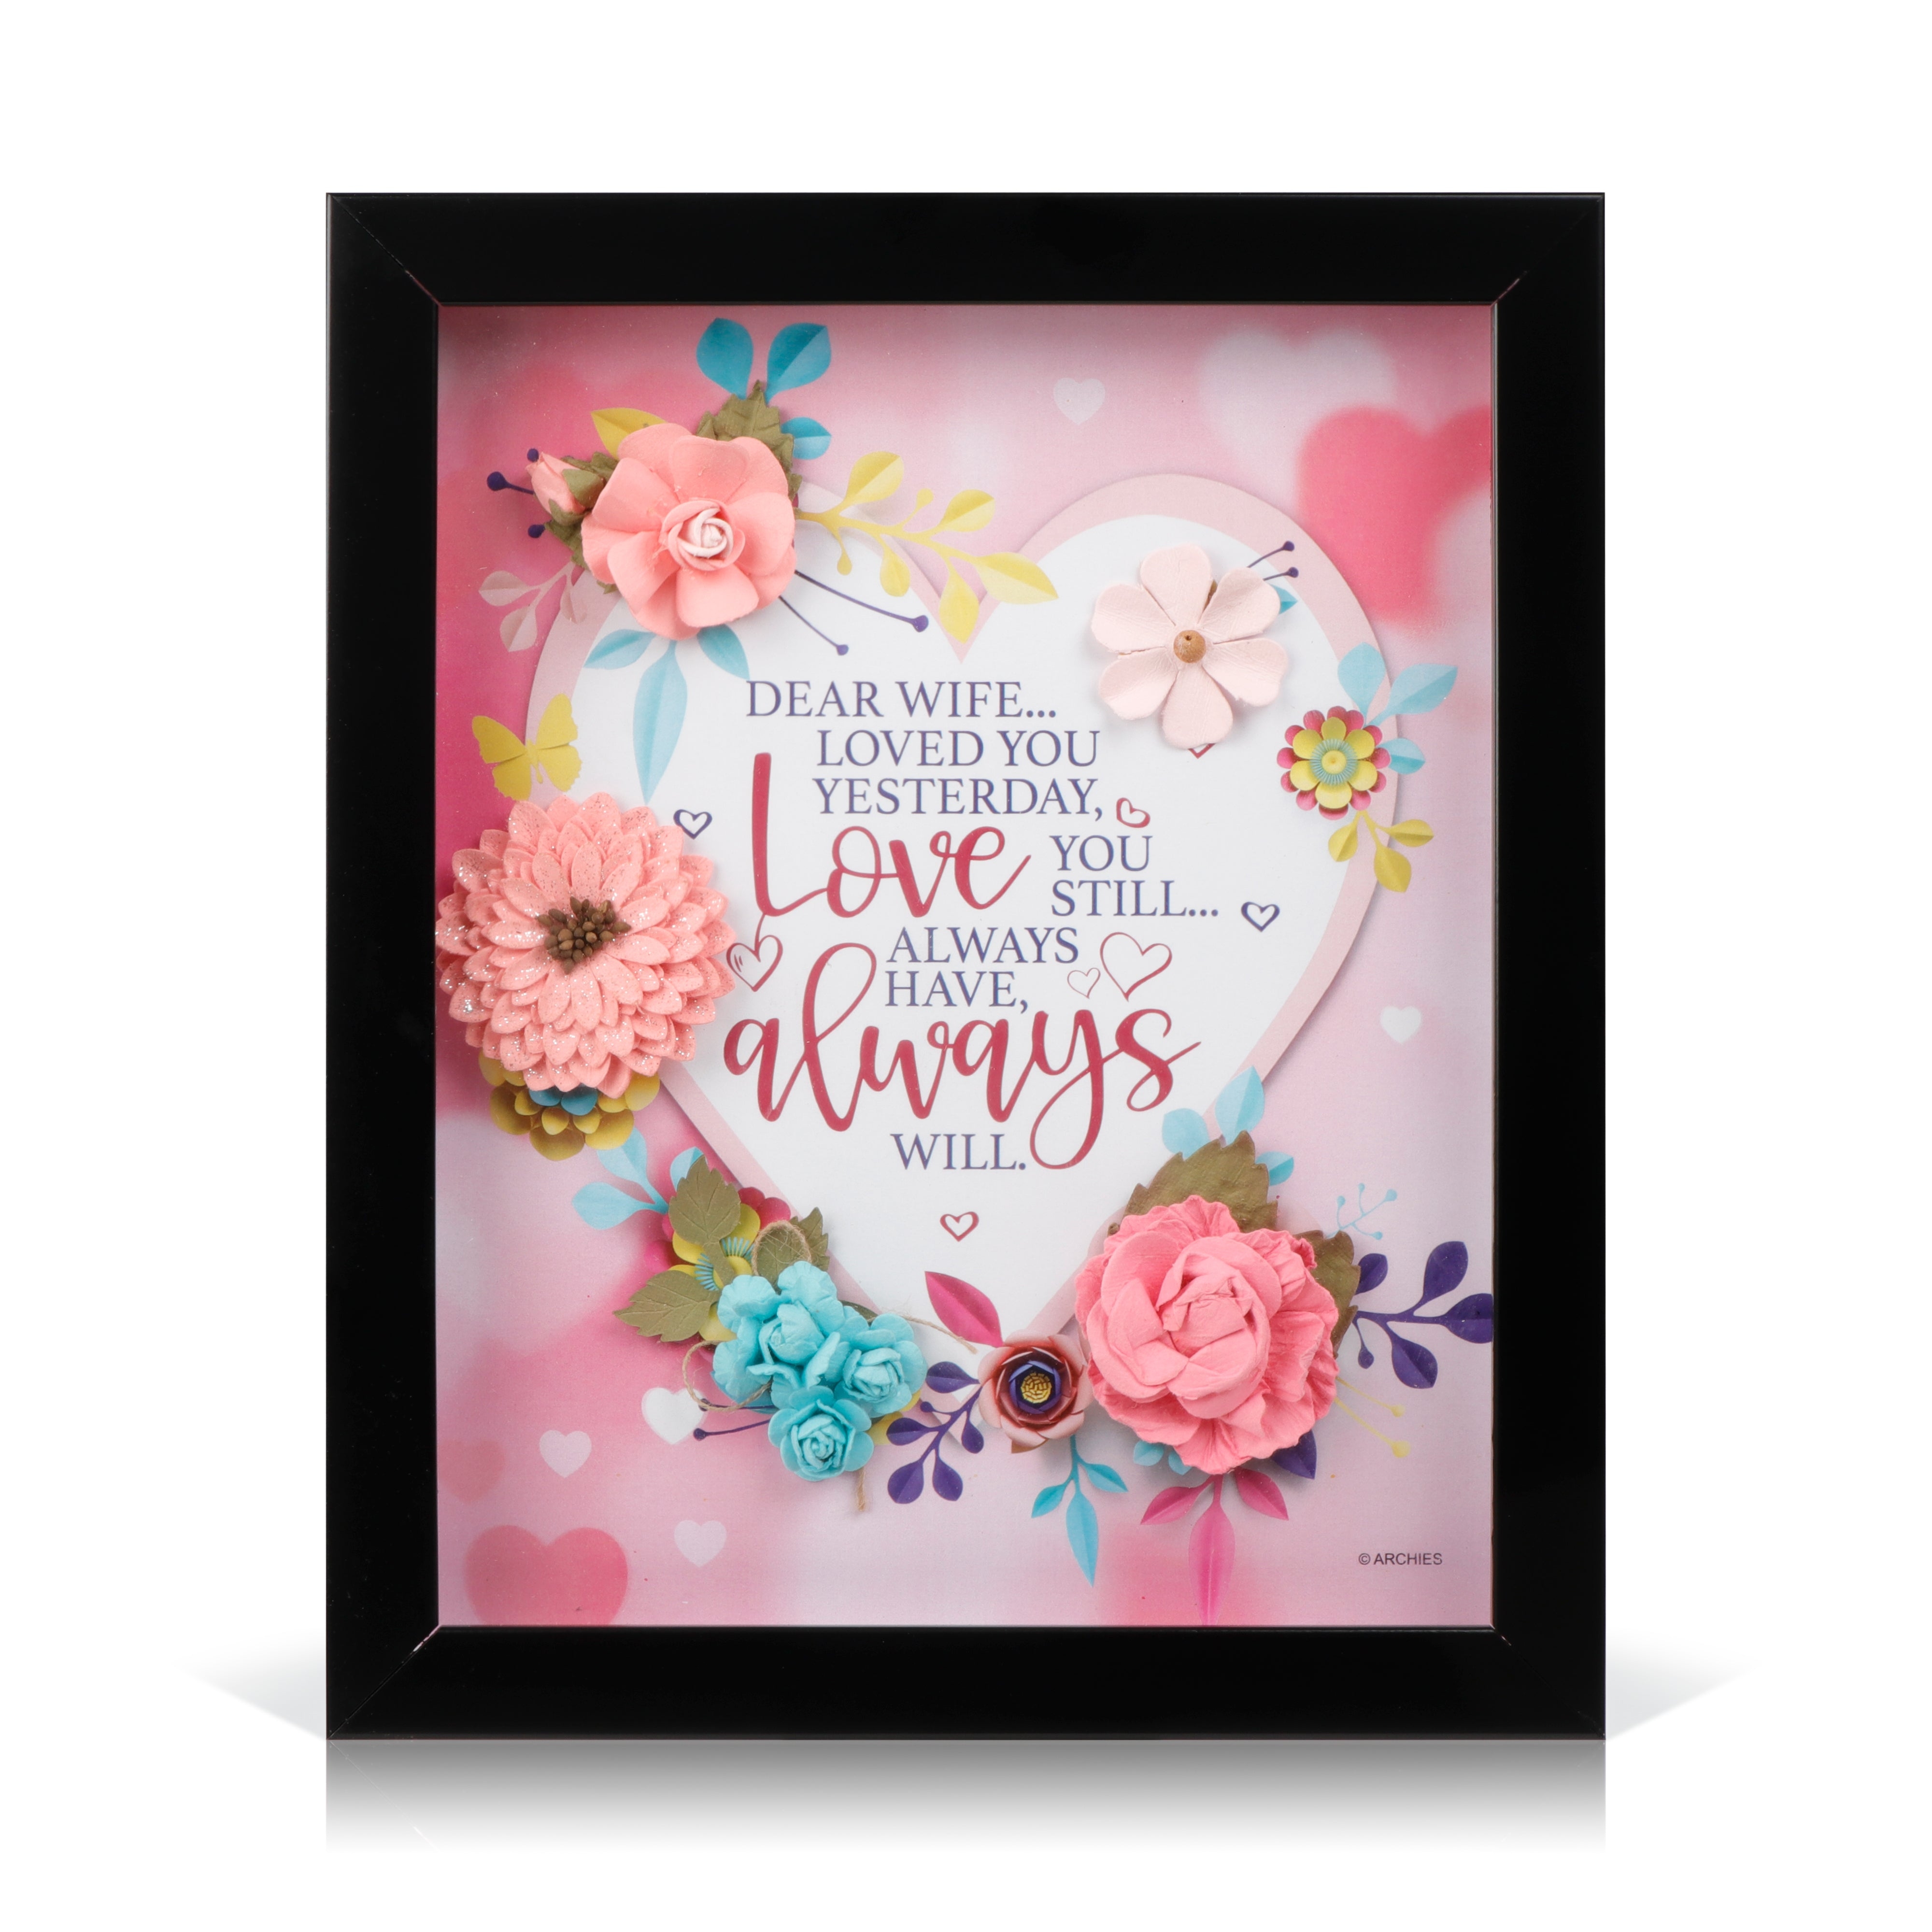 Archies | Archies KEEPSAKE QUOTATION - DEAR WIFE LOVED ..... For gifting and Home décor 0